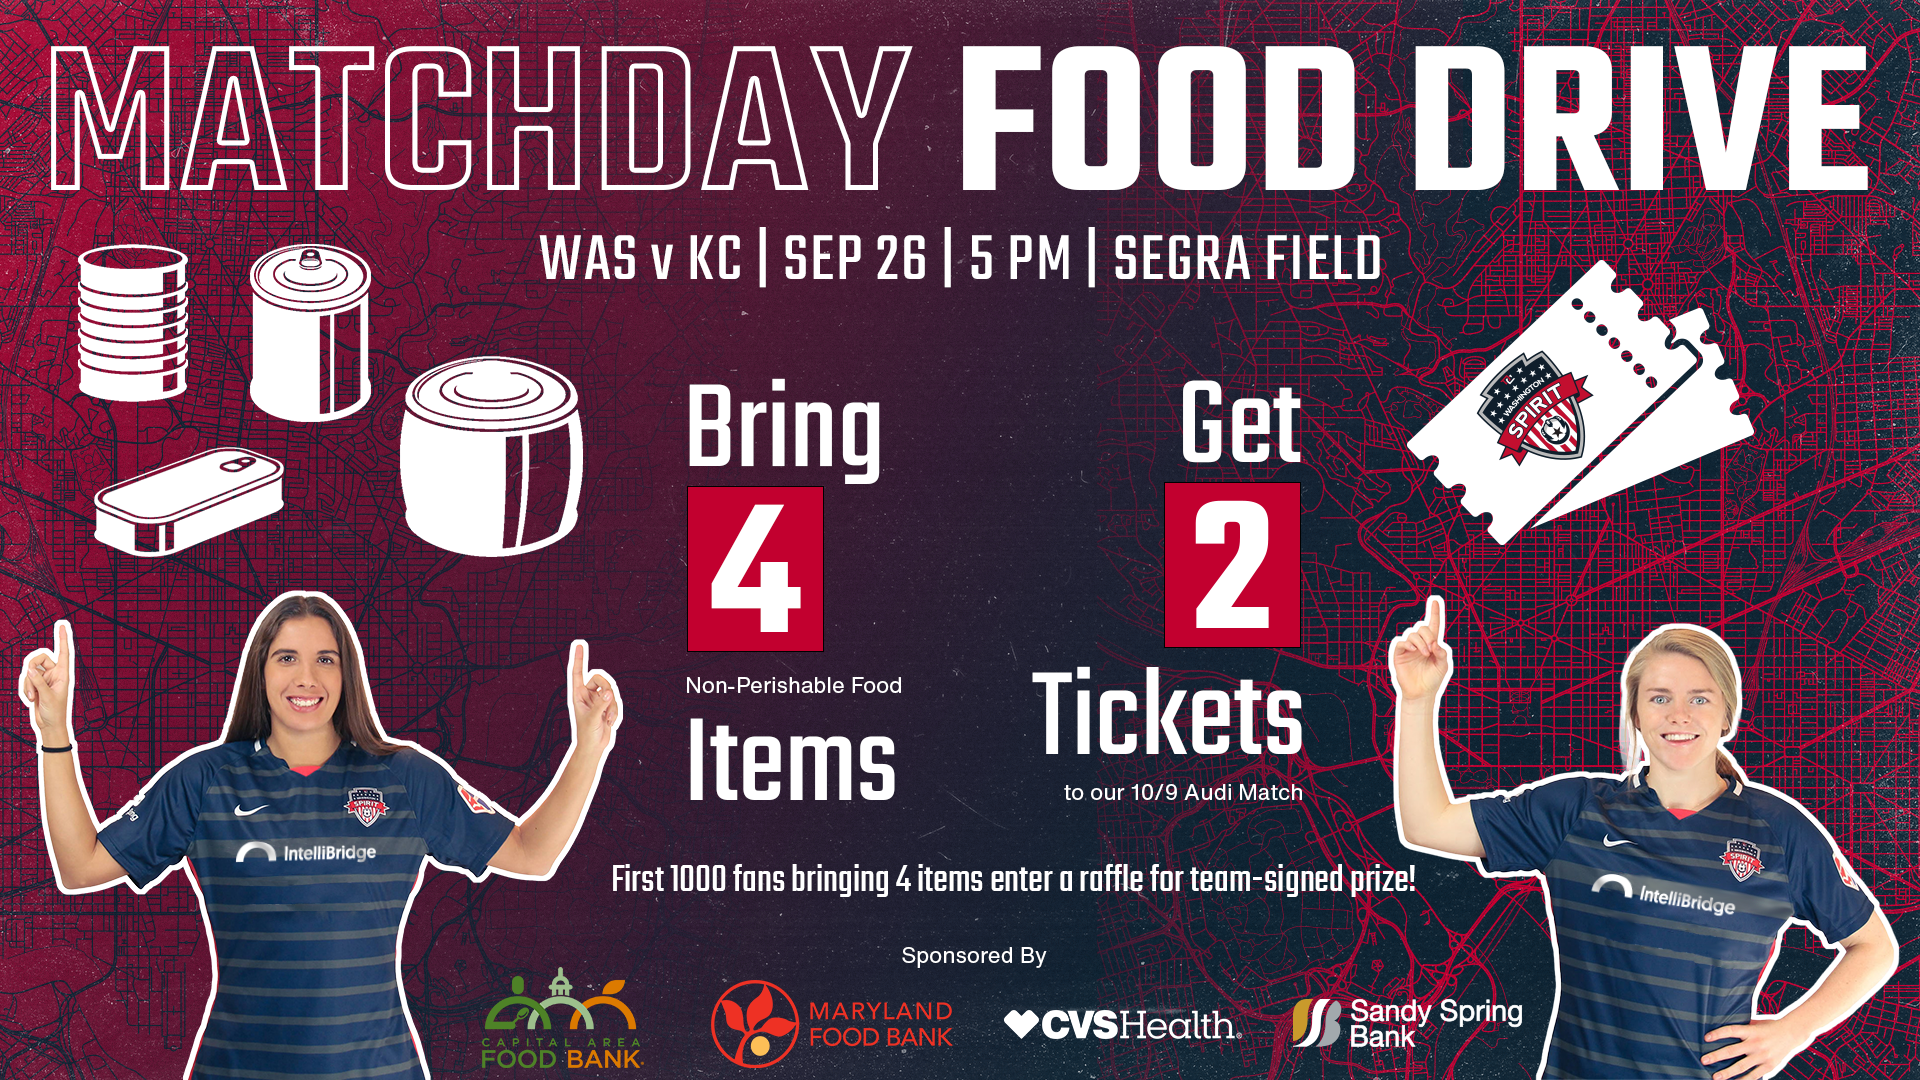 The Washington Spirit Partners with Sandy Spring Bank and CVS Health to Host a Food Drive Benefiting the Capital Area Food Bank and the Maryland Food Bank Featured Image